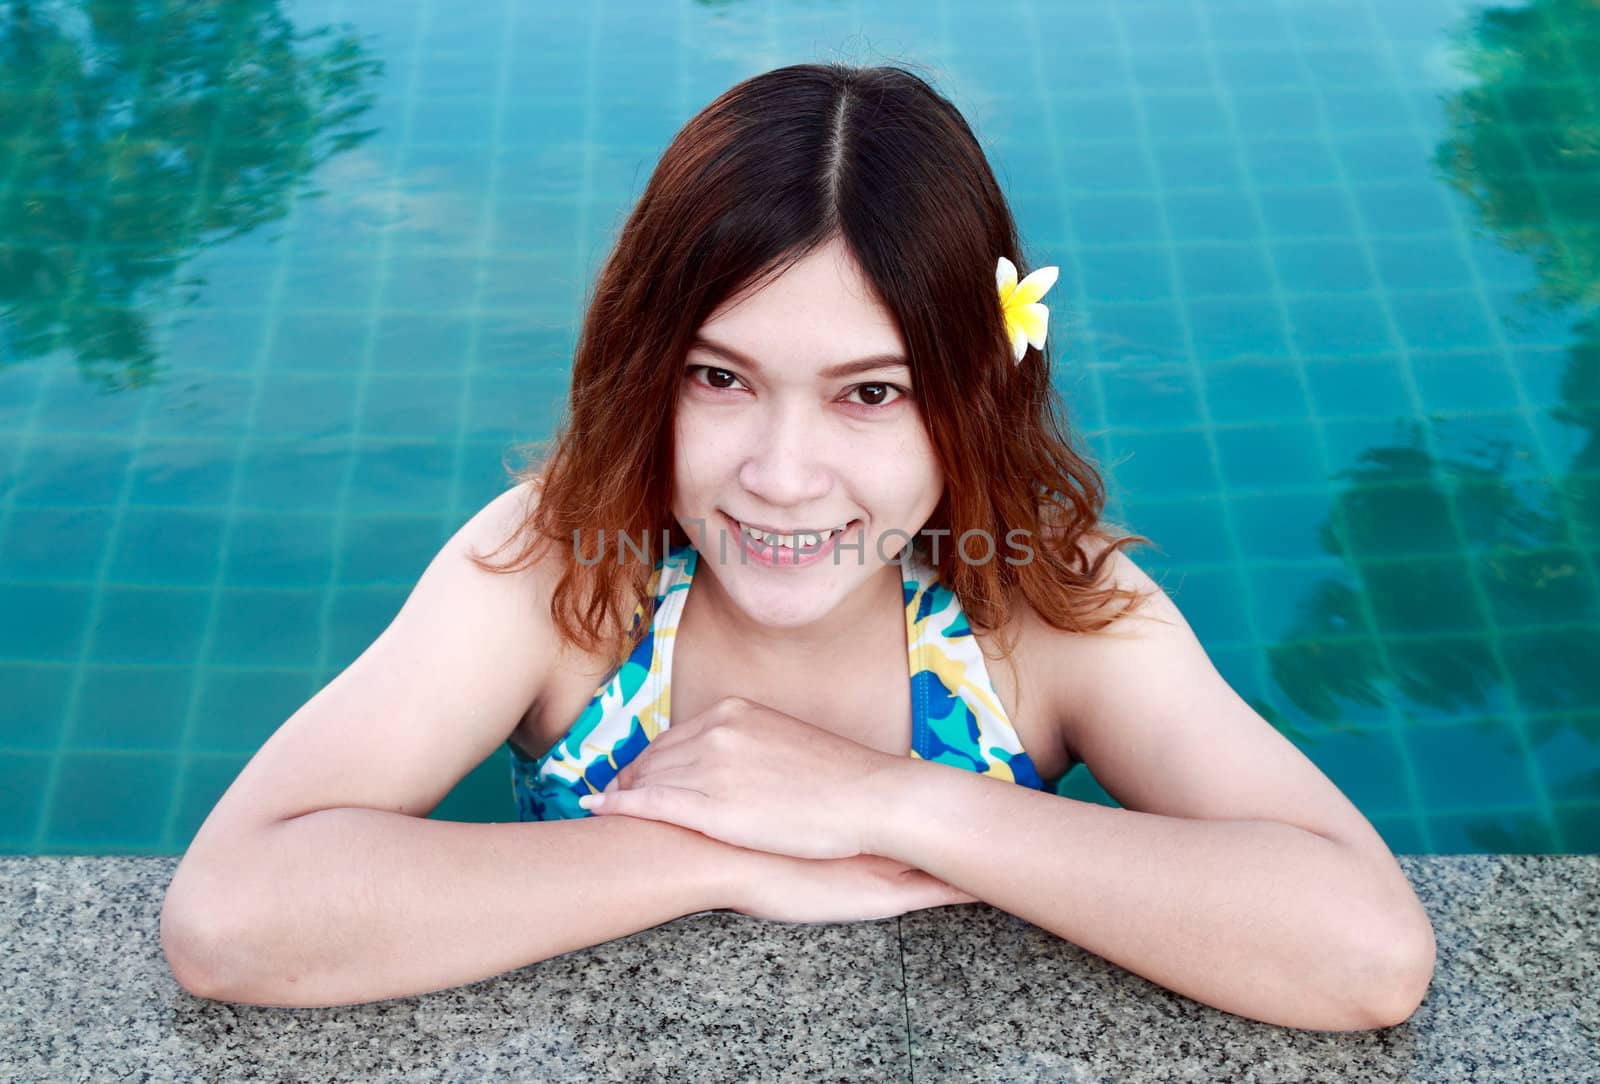 Closeup of beautiful woman resting on the edge of swimming pool by geargodz